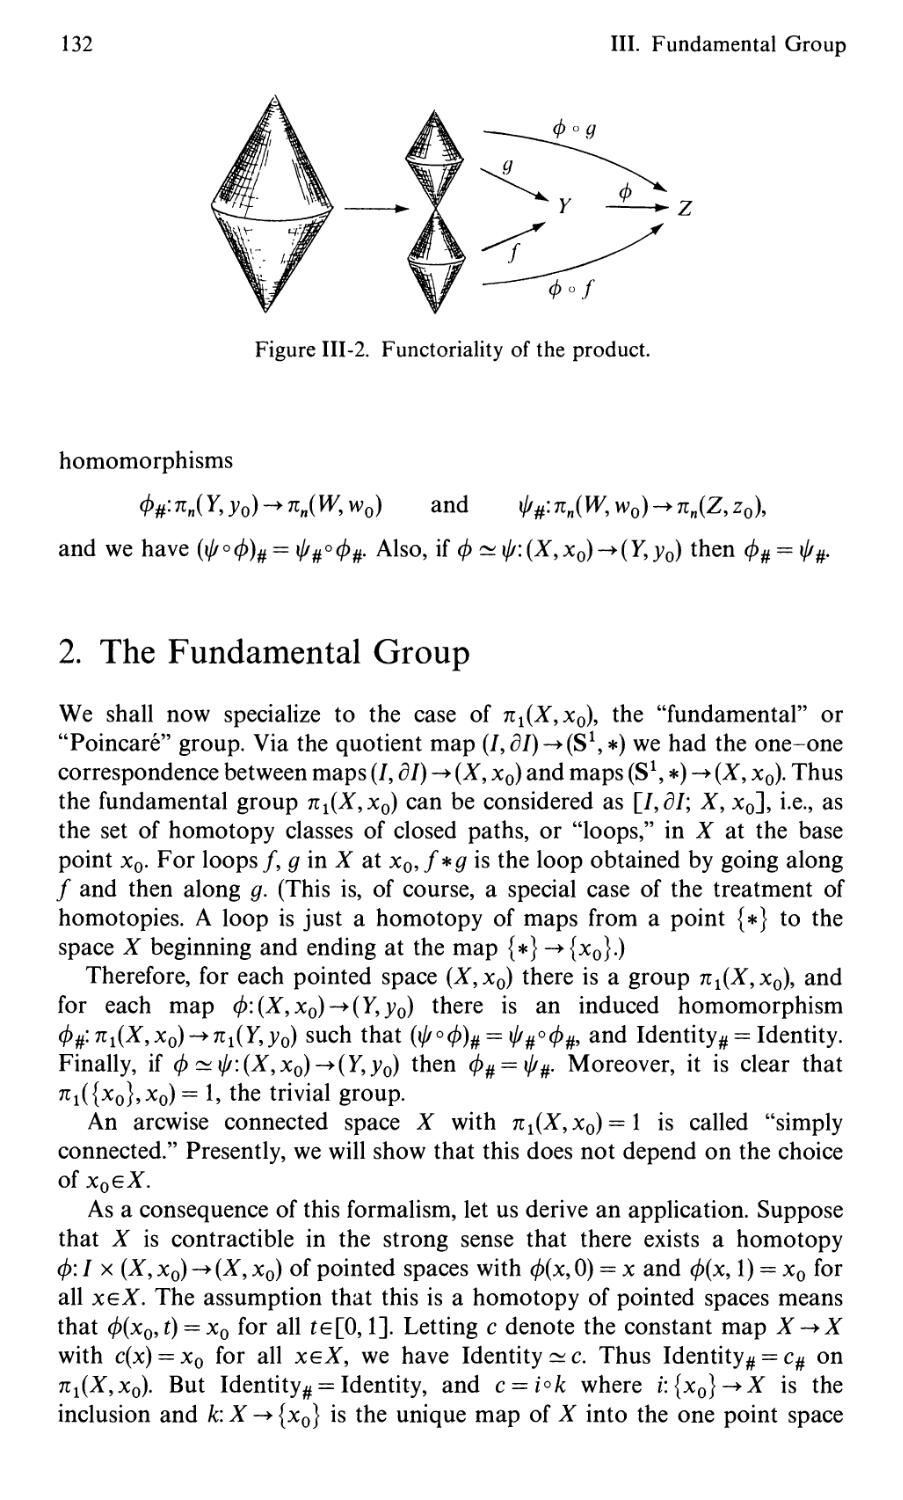 2. The Fundamental Group